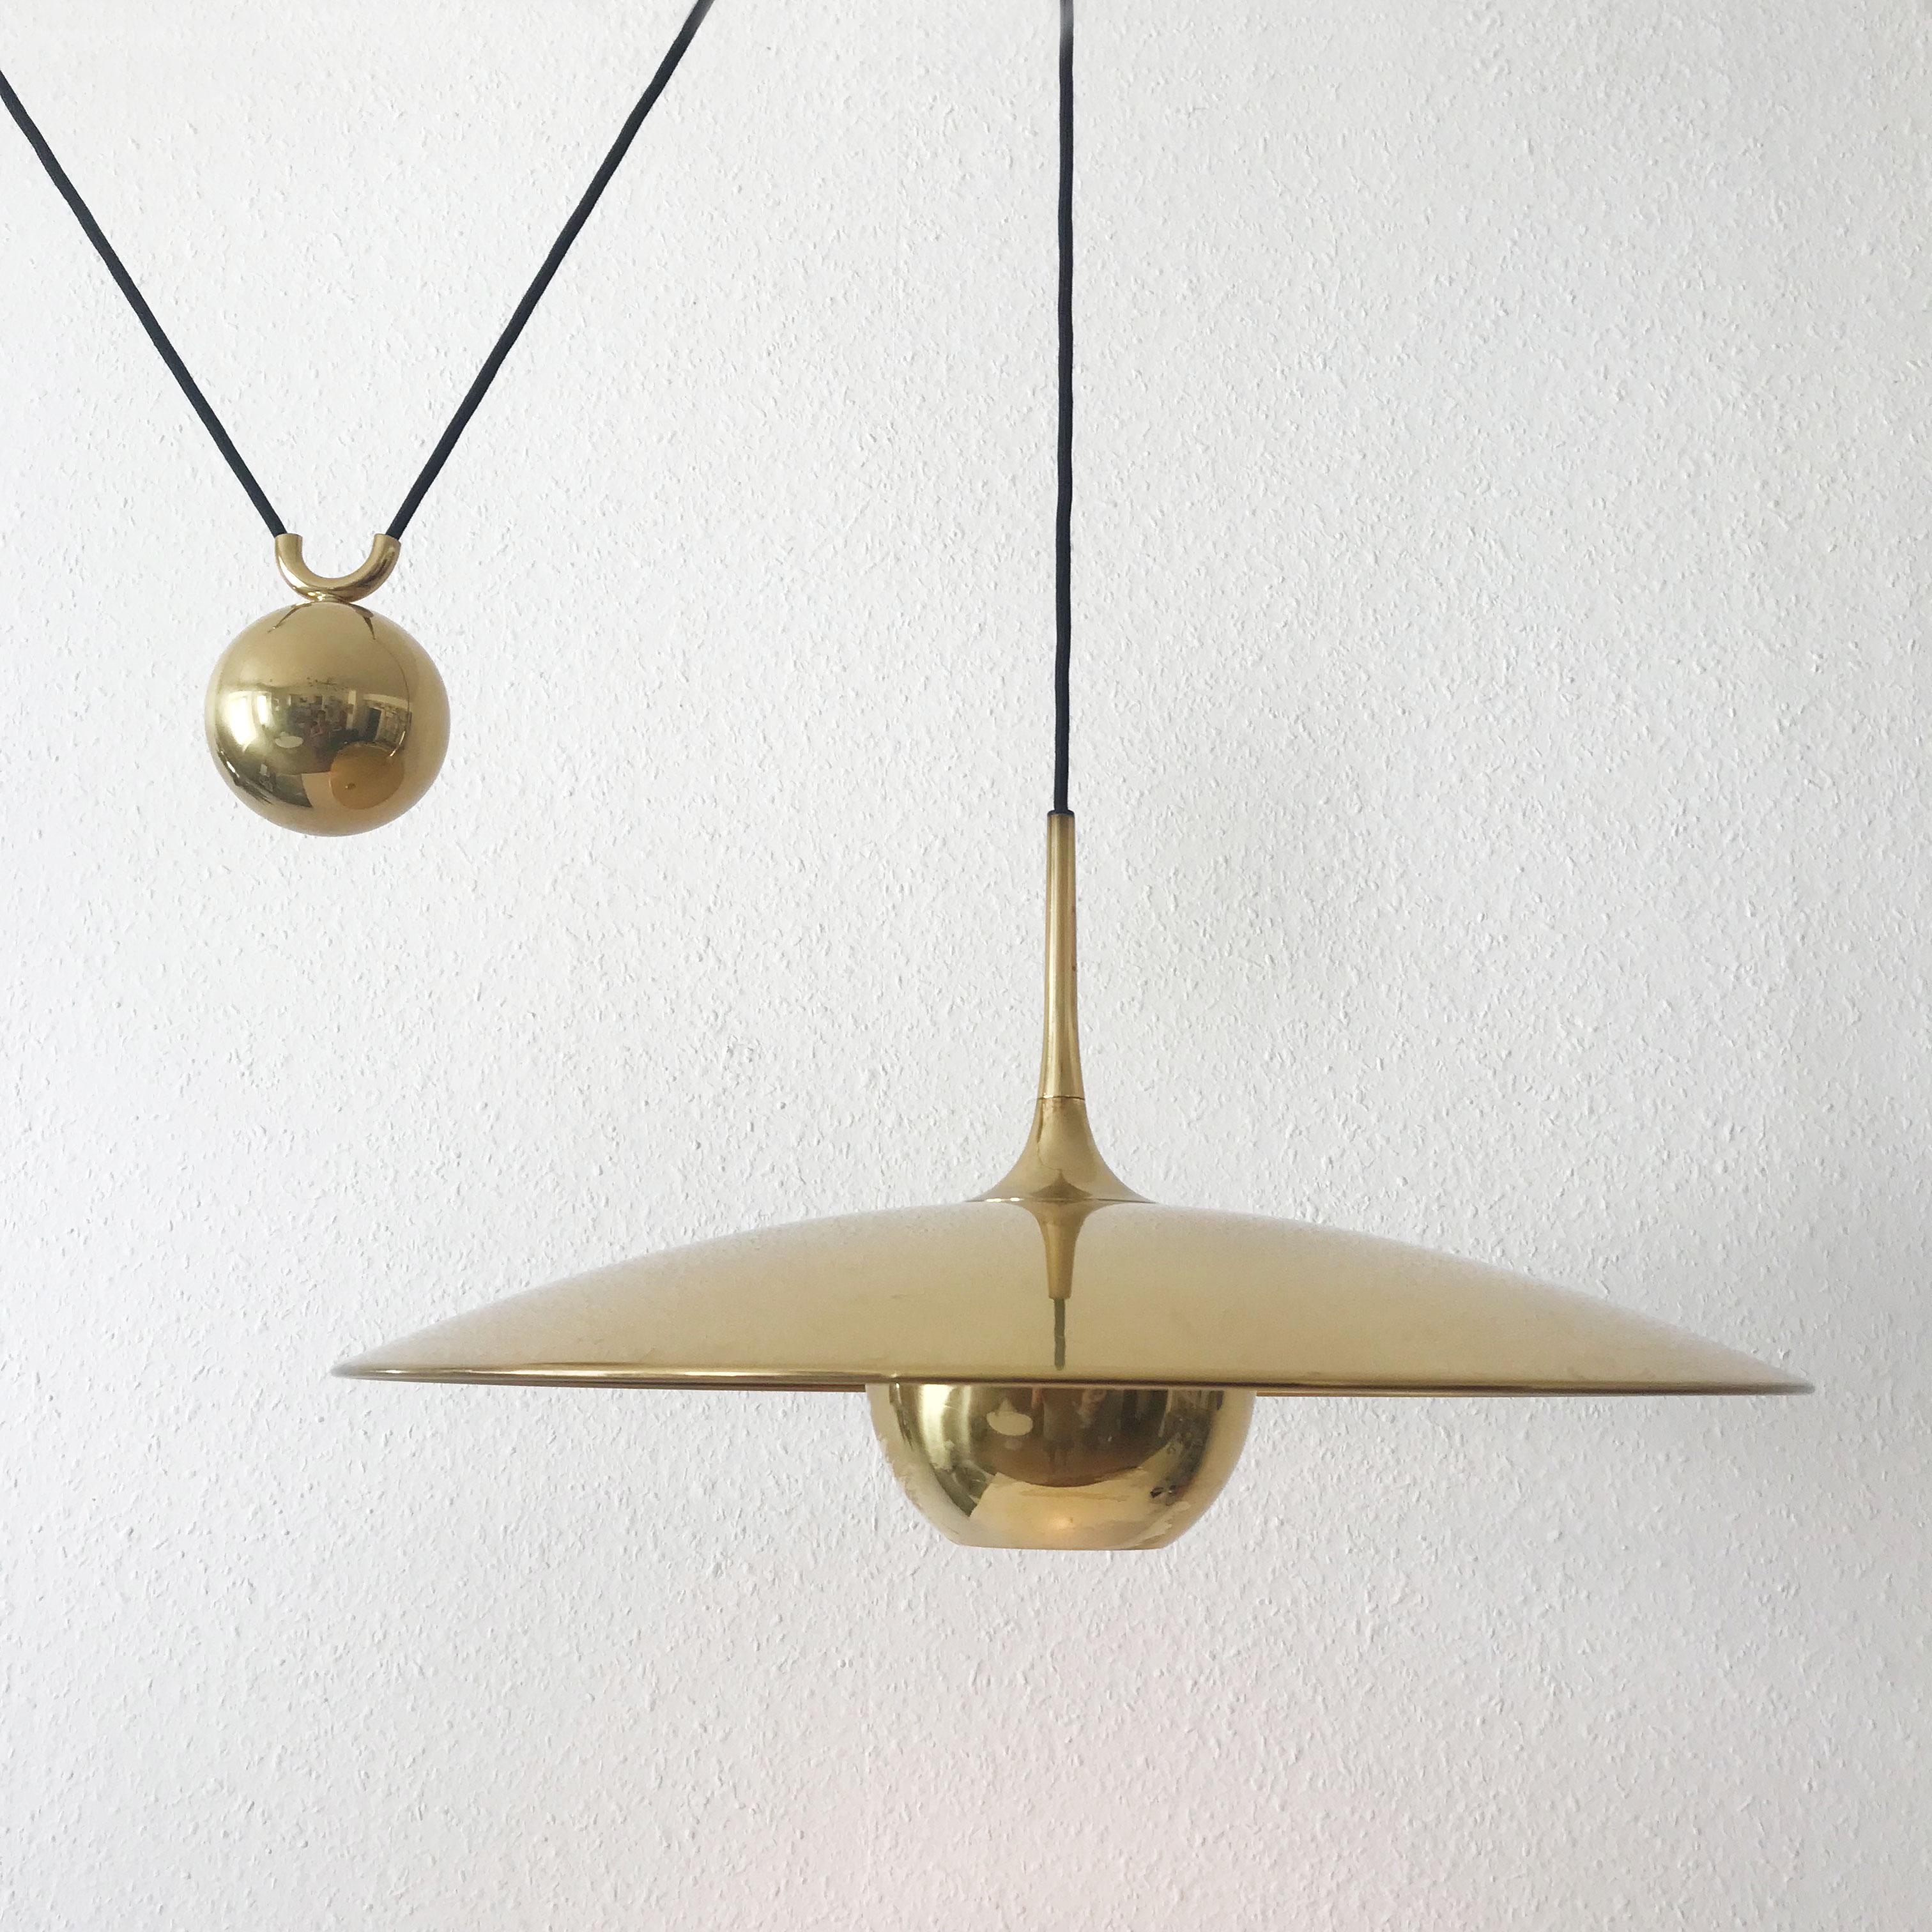 Counter Balance Pendant Lamp Onos 55 by Florian Schulz, 1980s, Germany 2